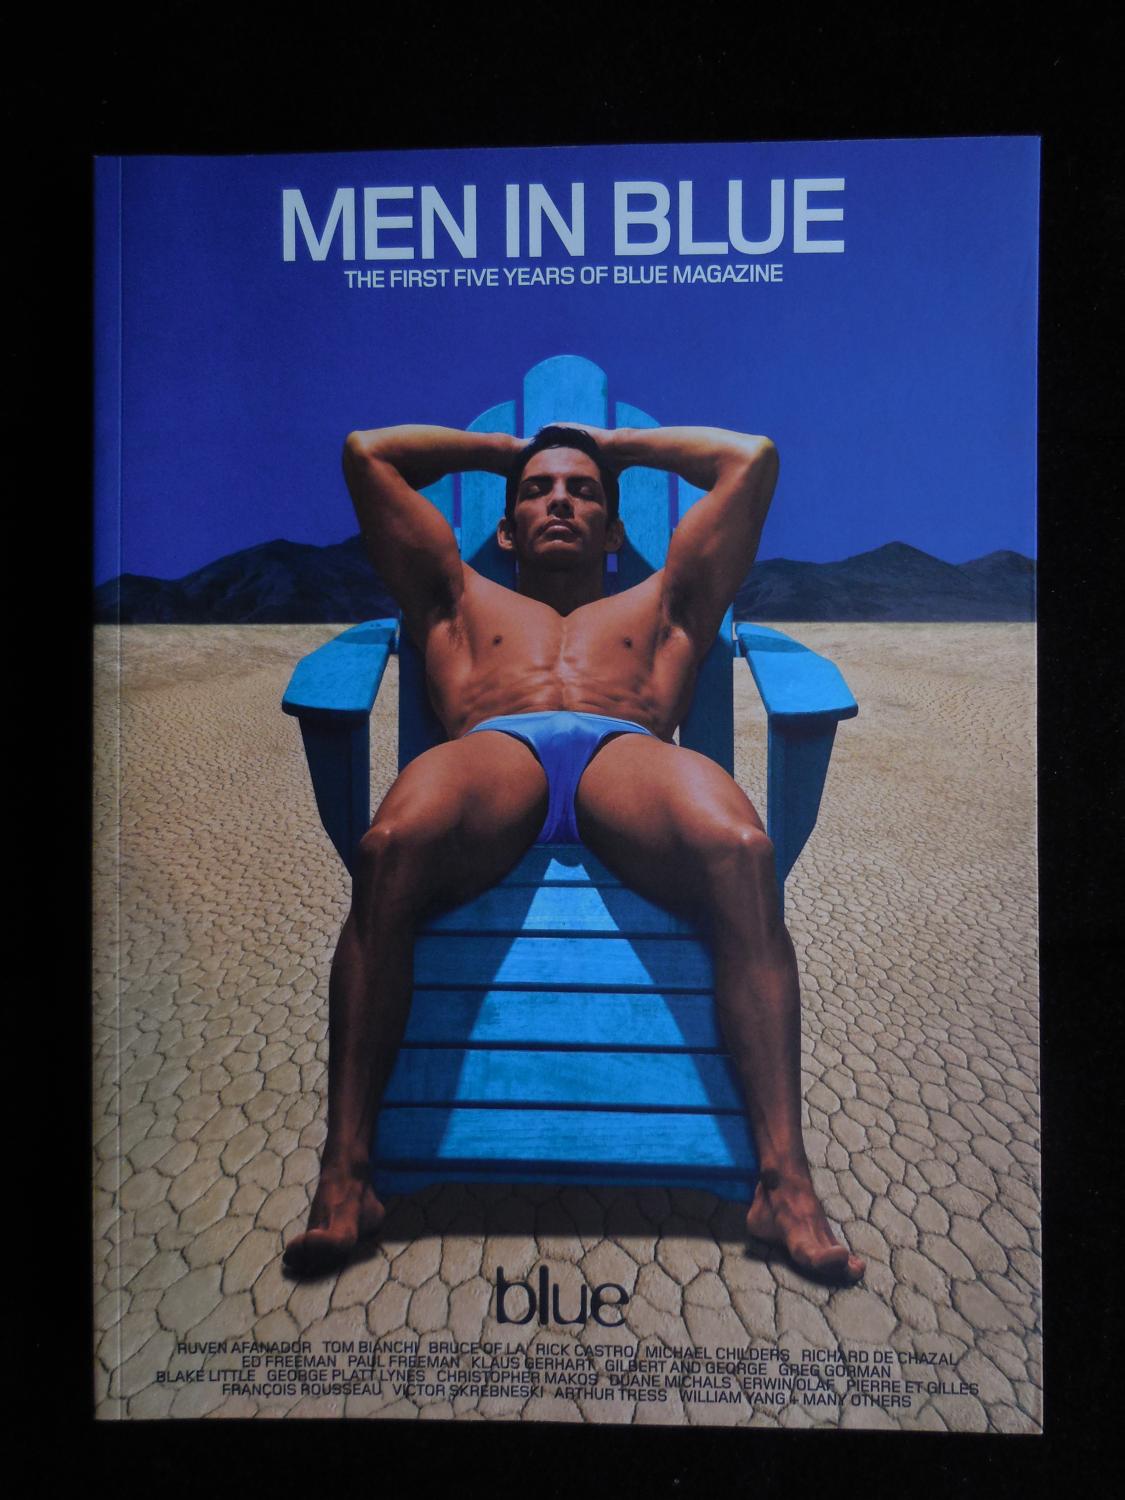 (not only) blue magazine men in blue 5th anniversary